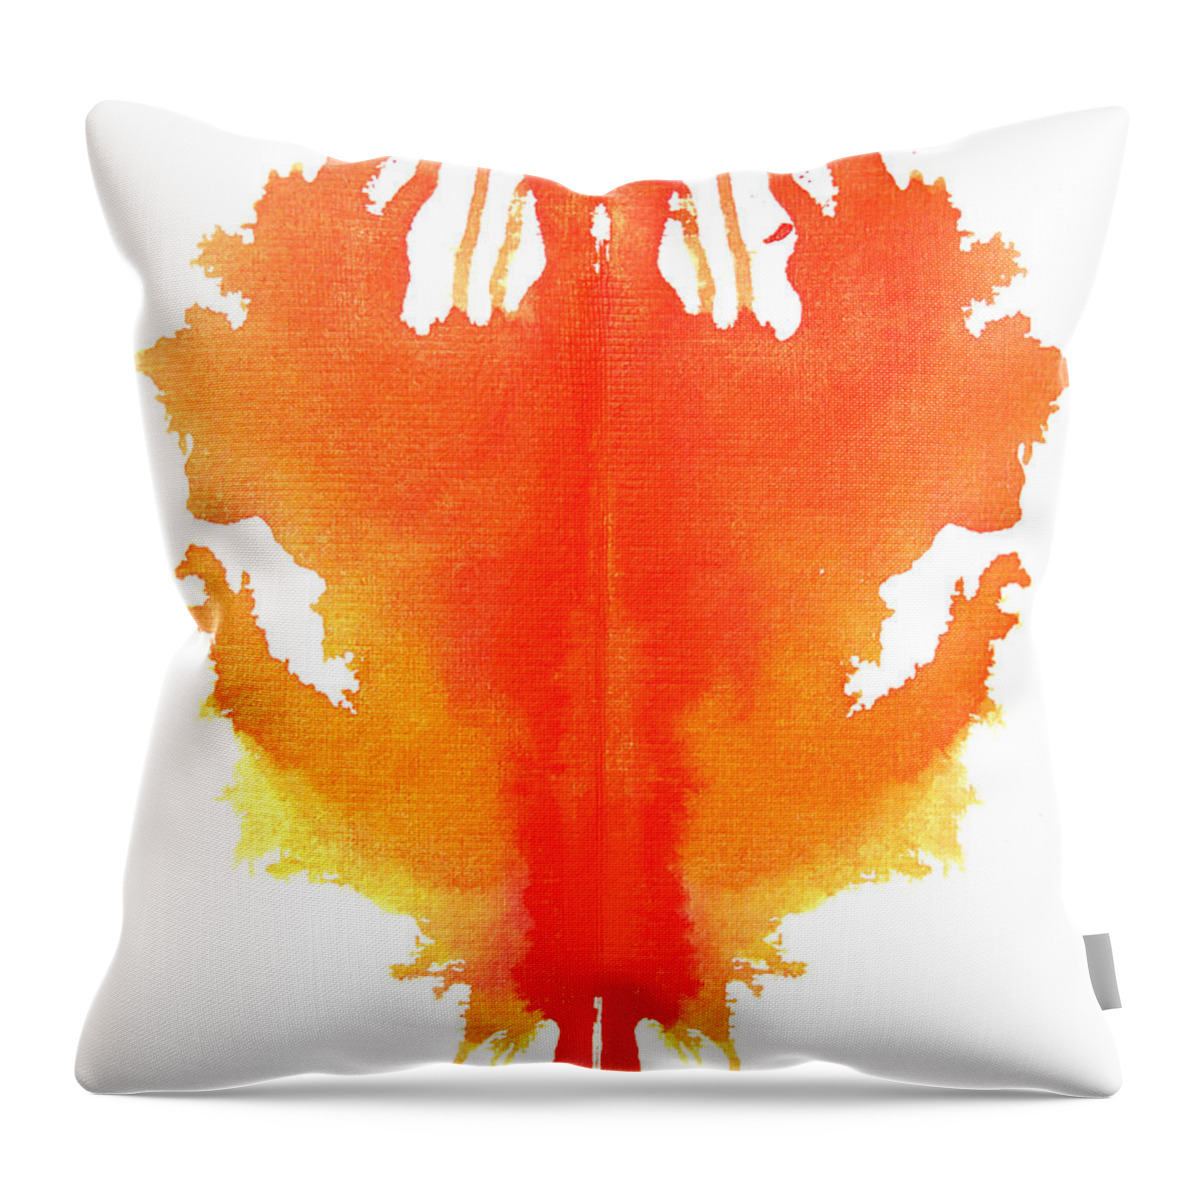 Abstract Throw Pillow featuring the painting Sacral by Stephenie Zagorski